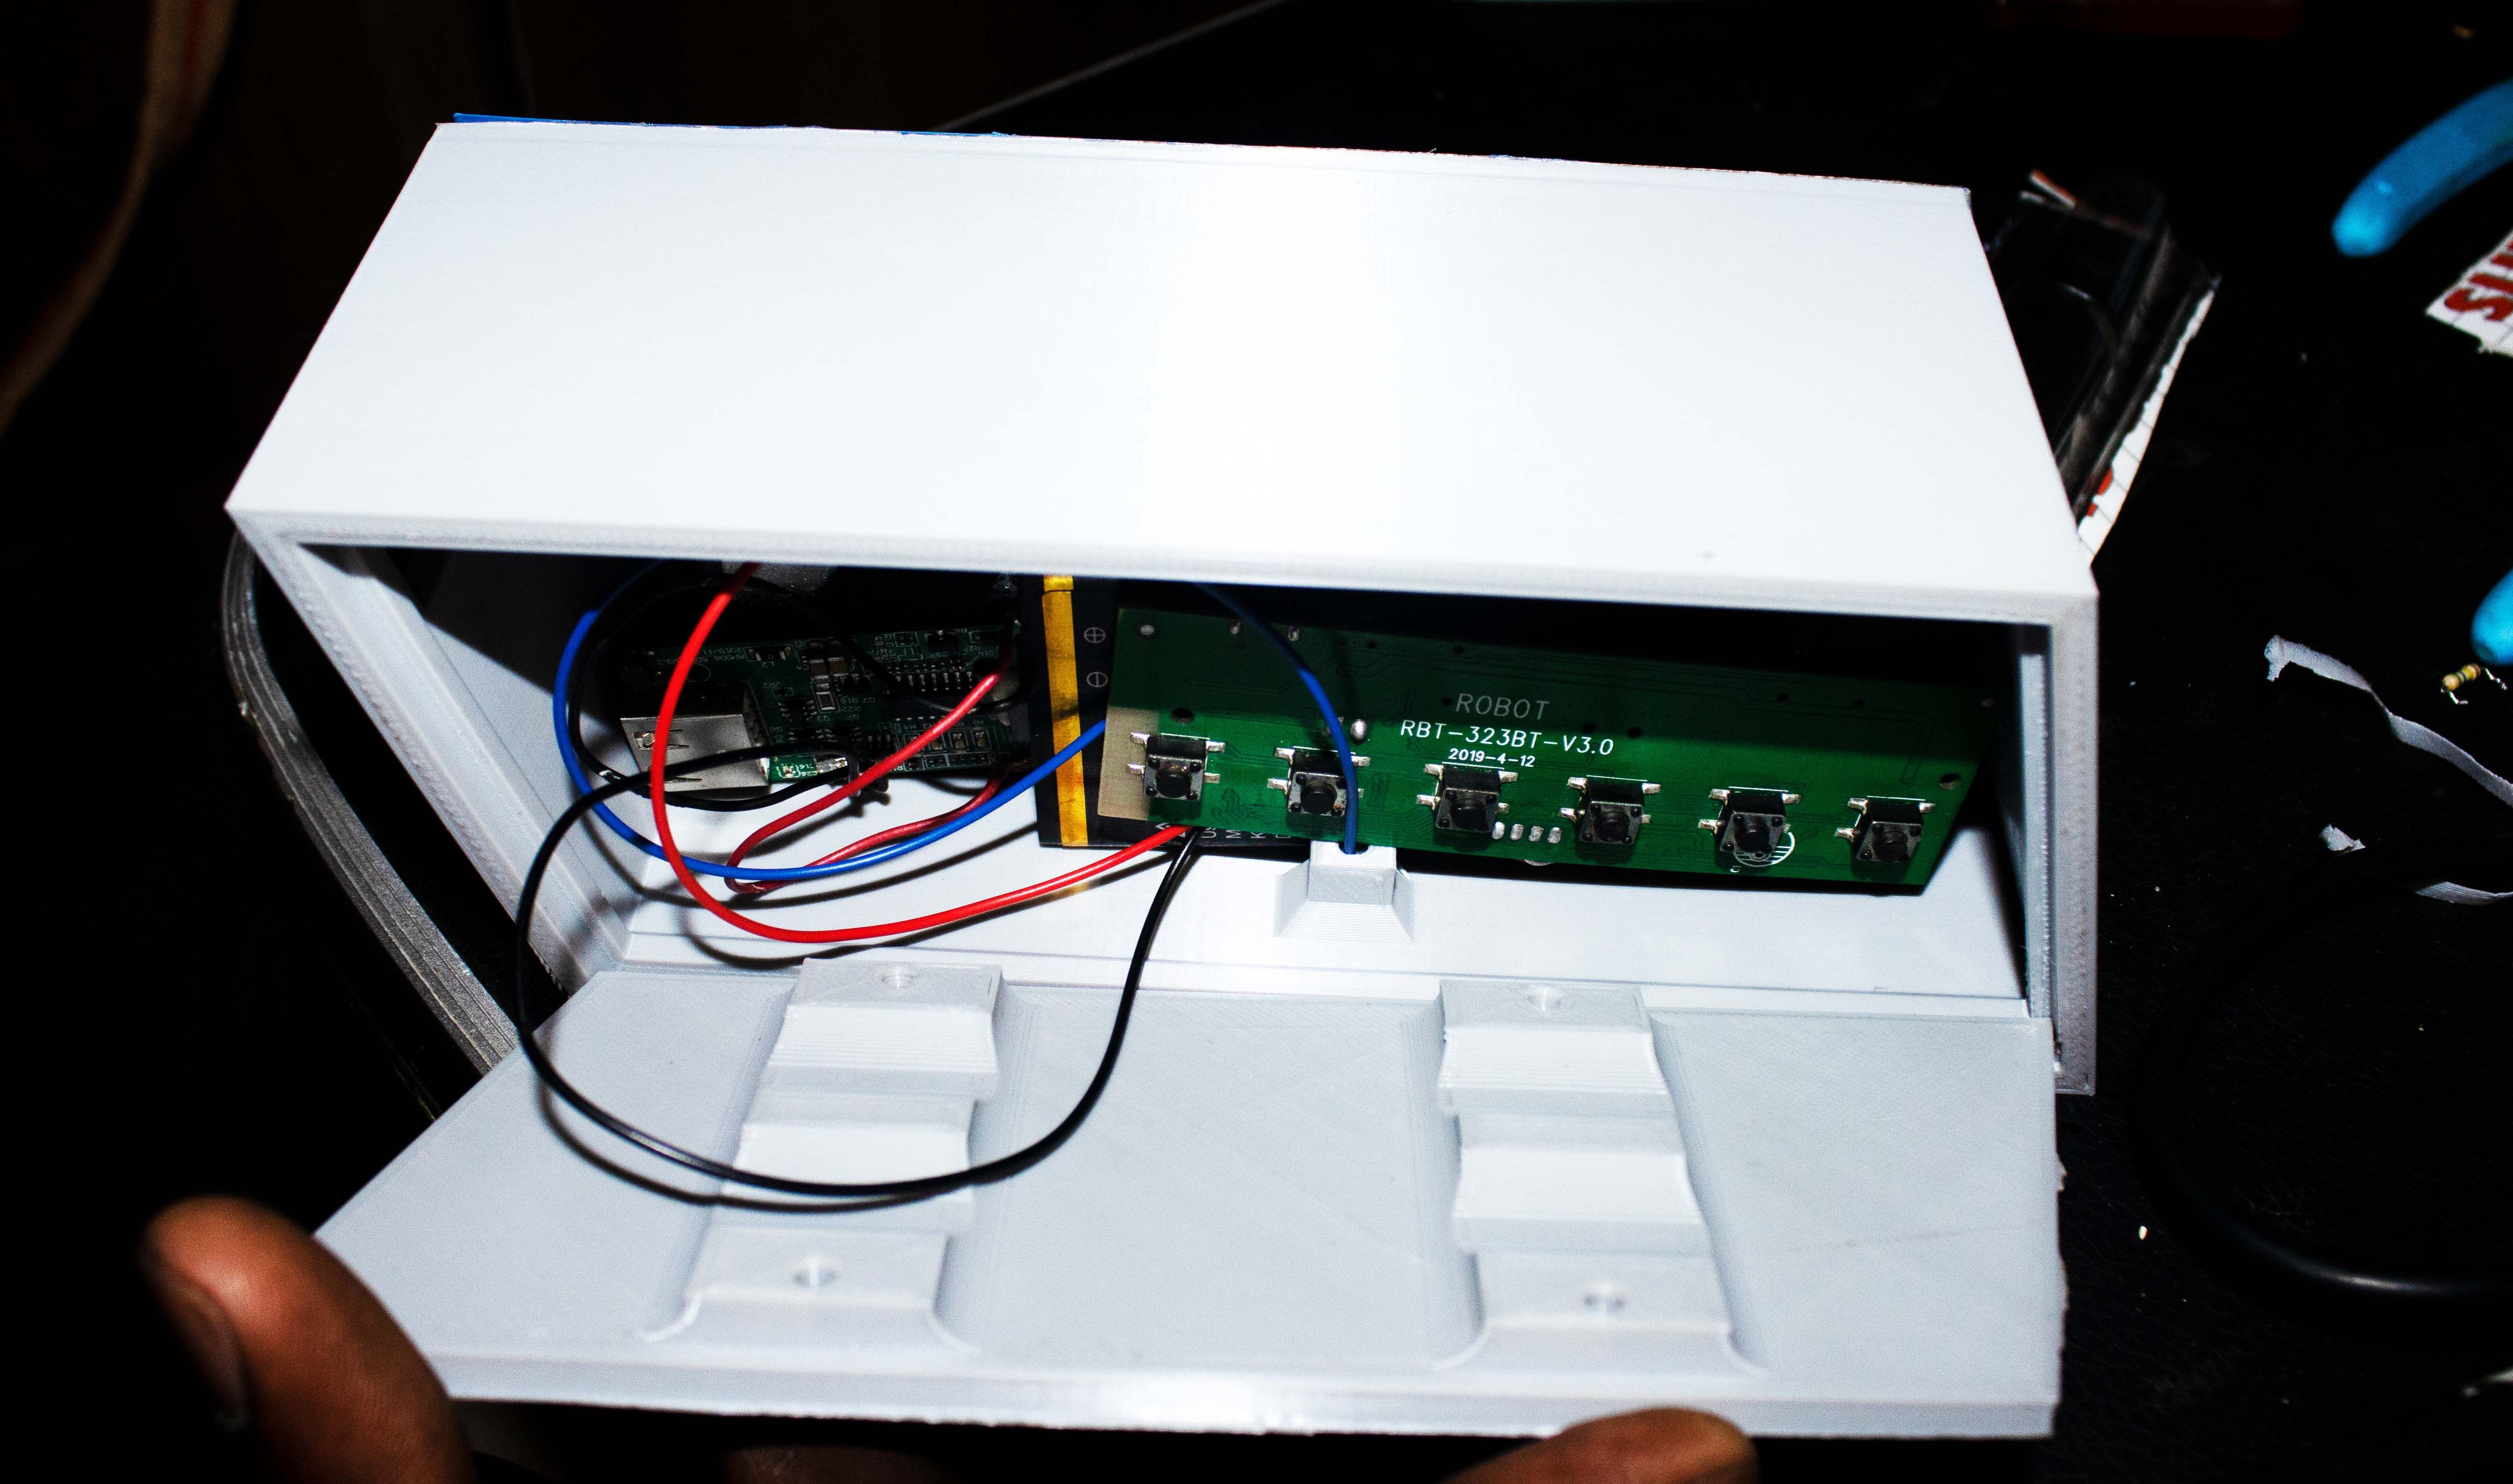 Amplifier, charging system and batteries inserted into the Bluetooth box